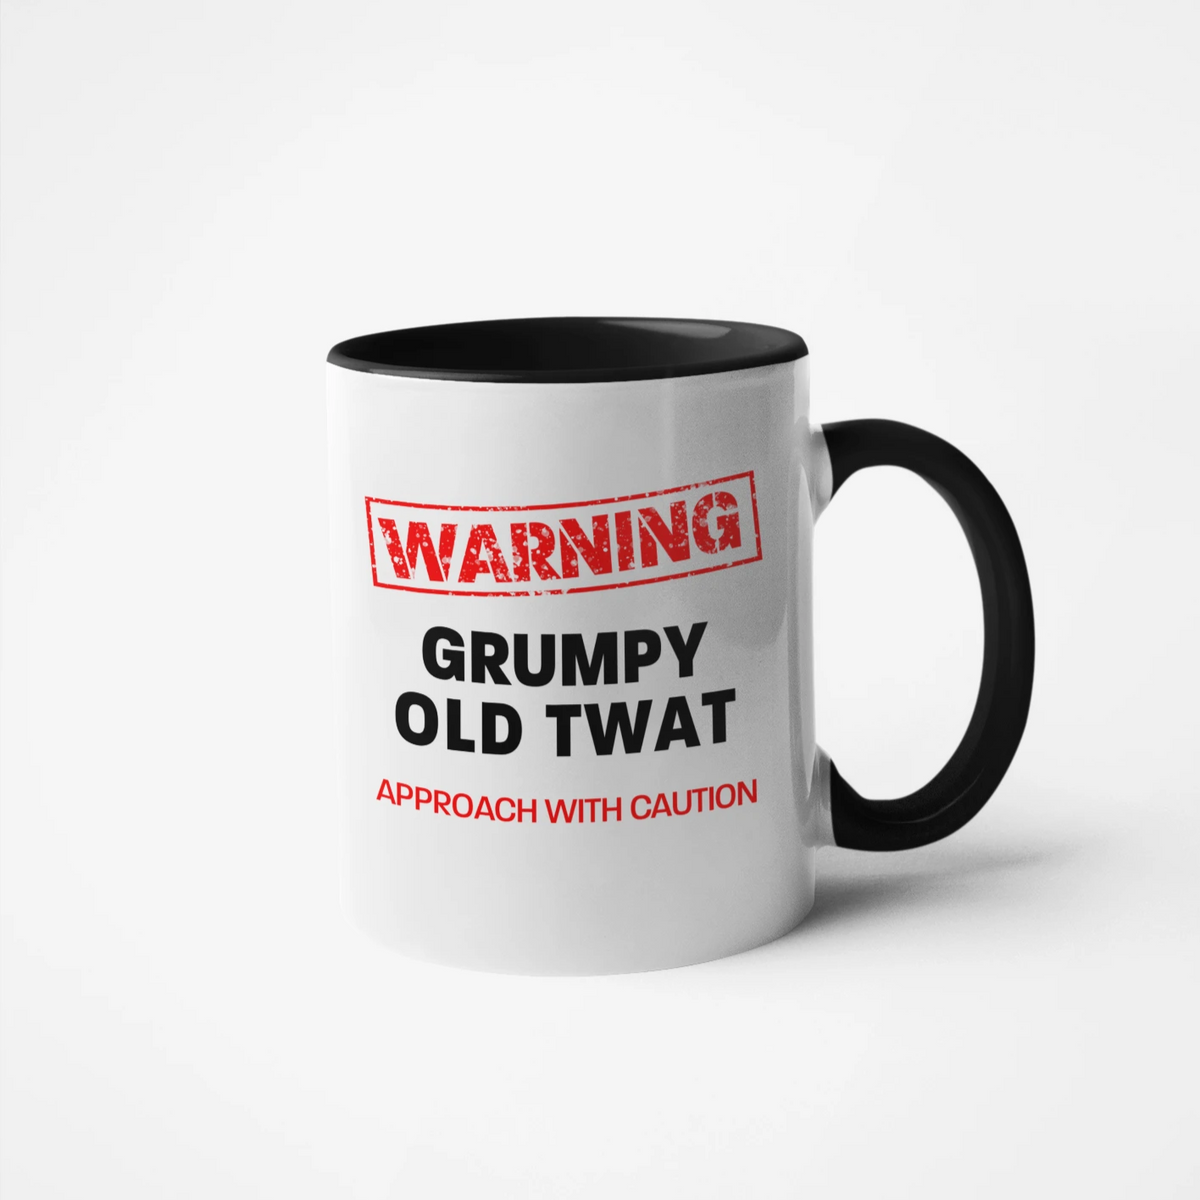 WARNING - Approach With Caution Mug